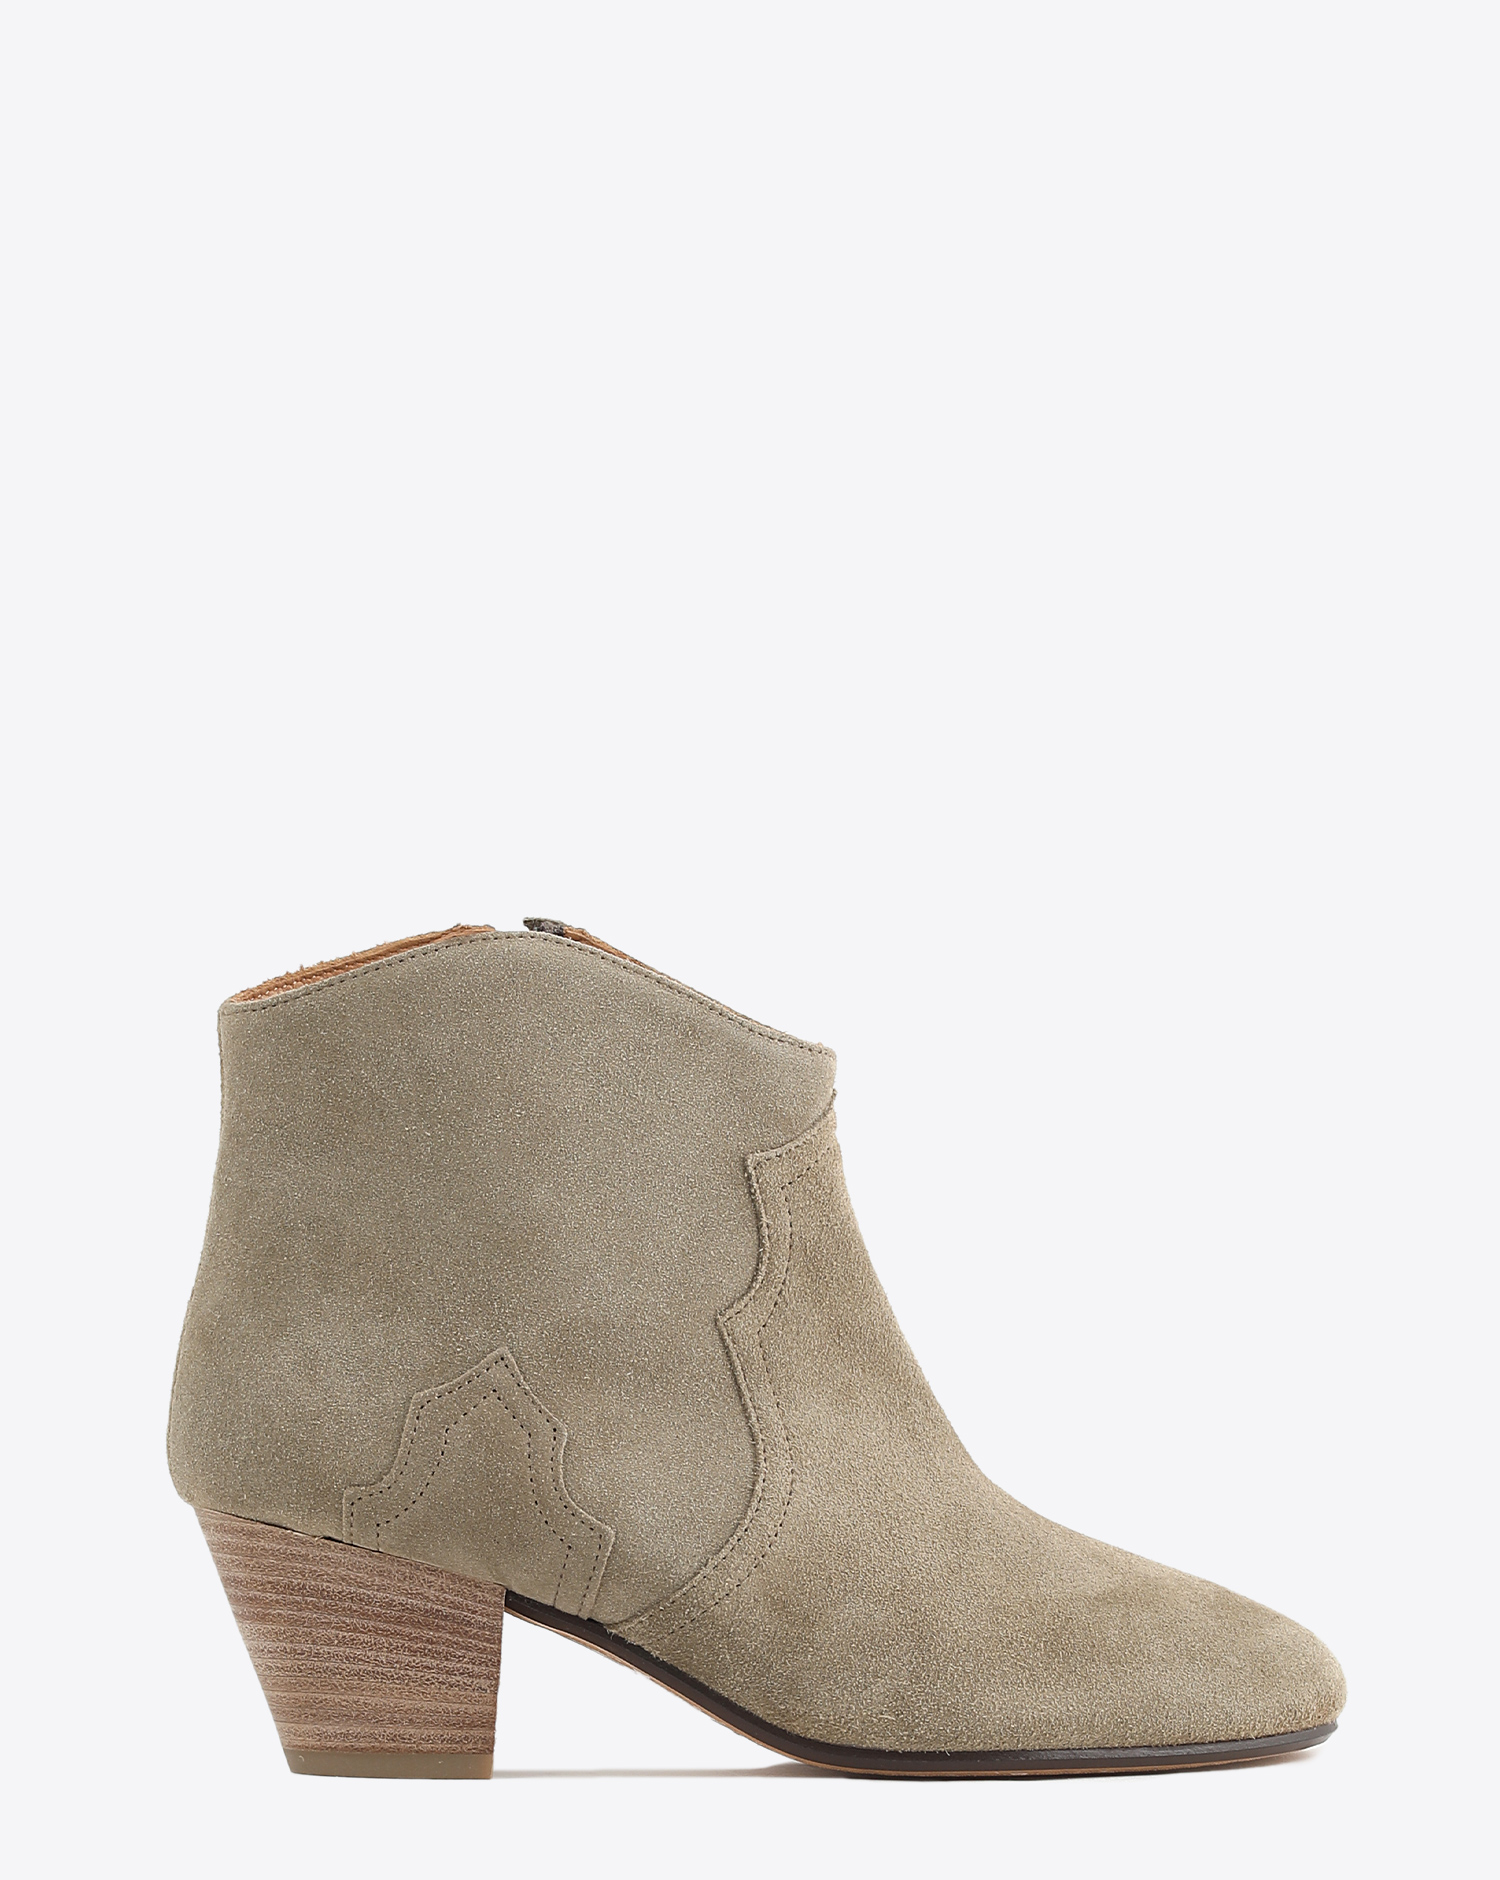 Chaussures Marant Boots Isabel – Taupe Beige Dicker